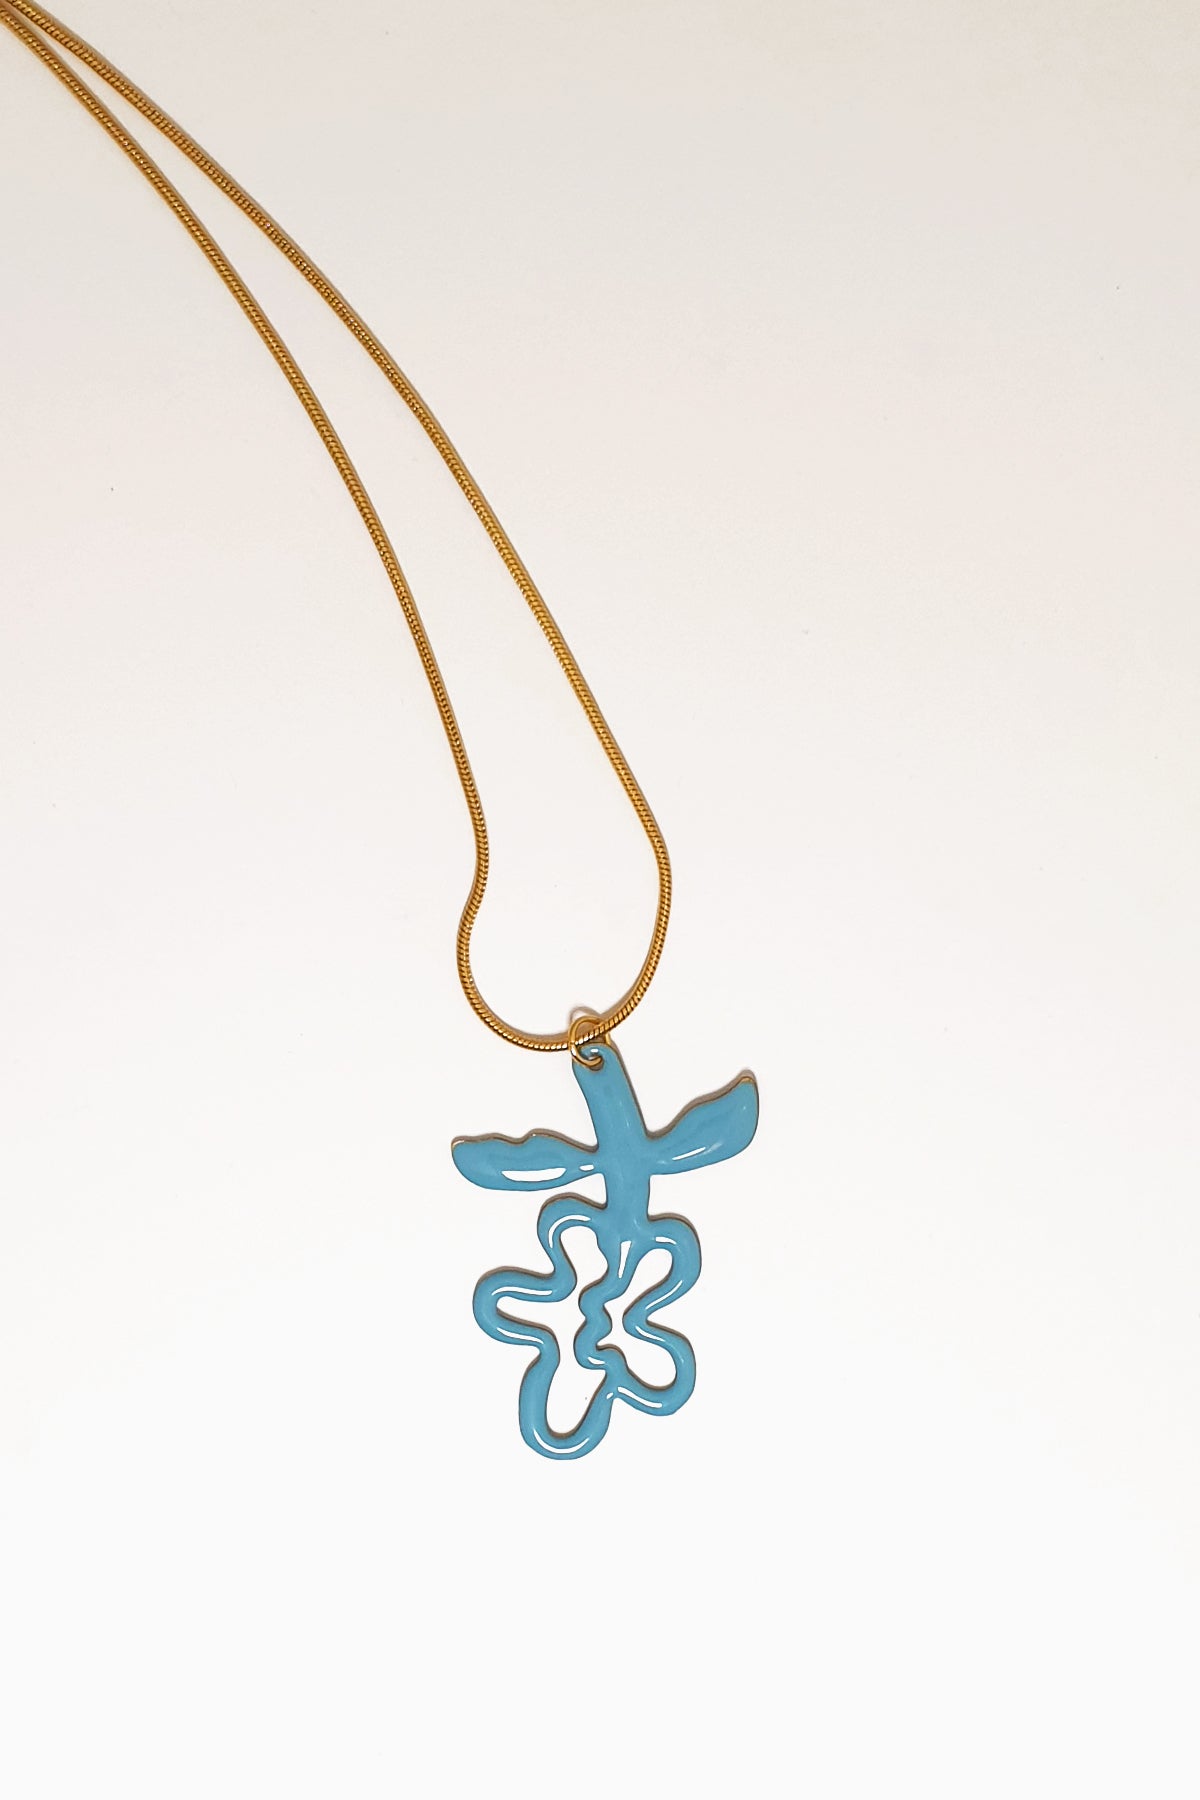 A necklace lays against a white background. It features a gold chain from which a blue enamel abstract flower shape hangs upside down.